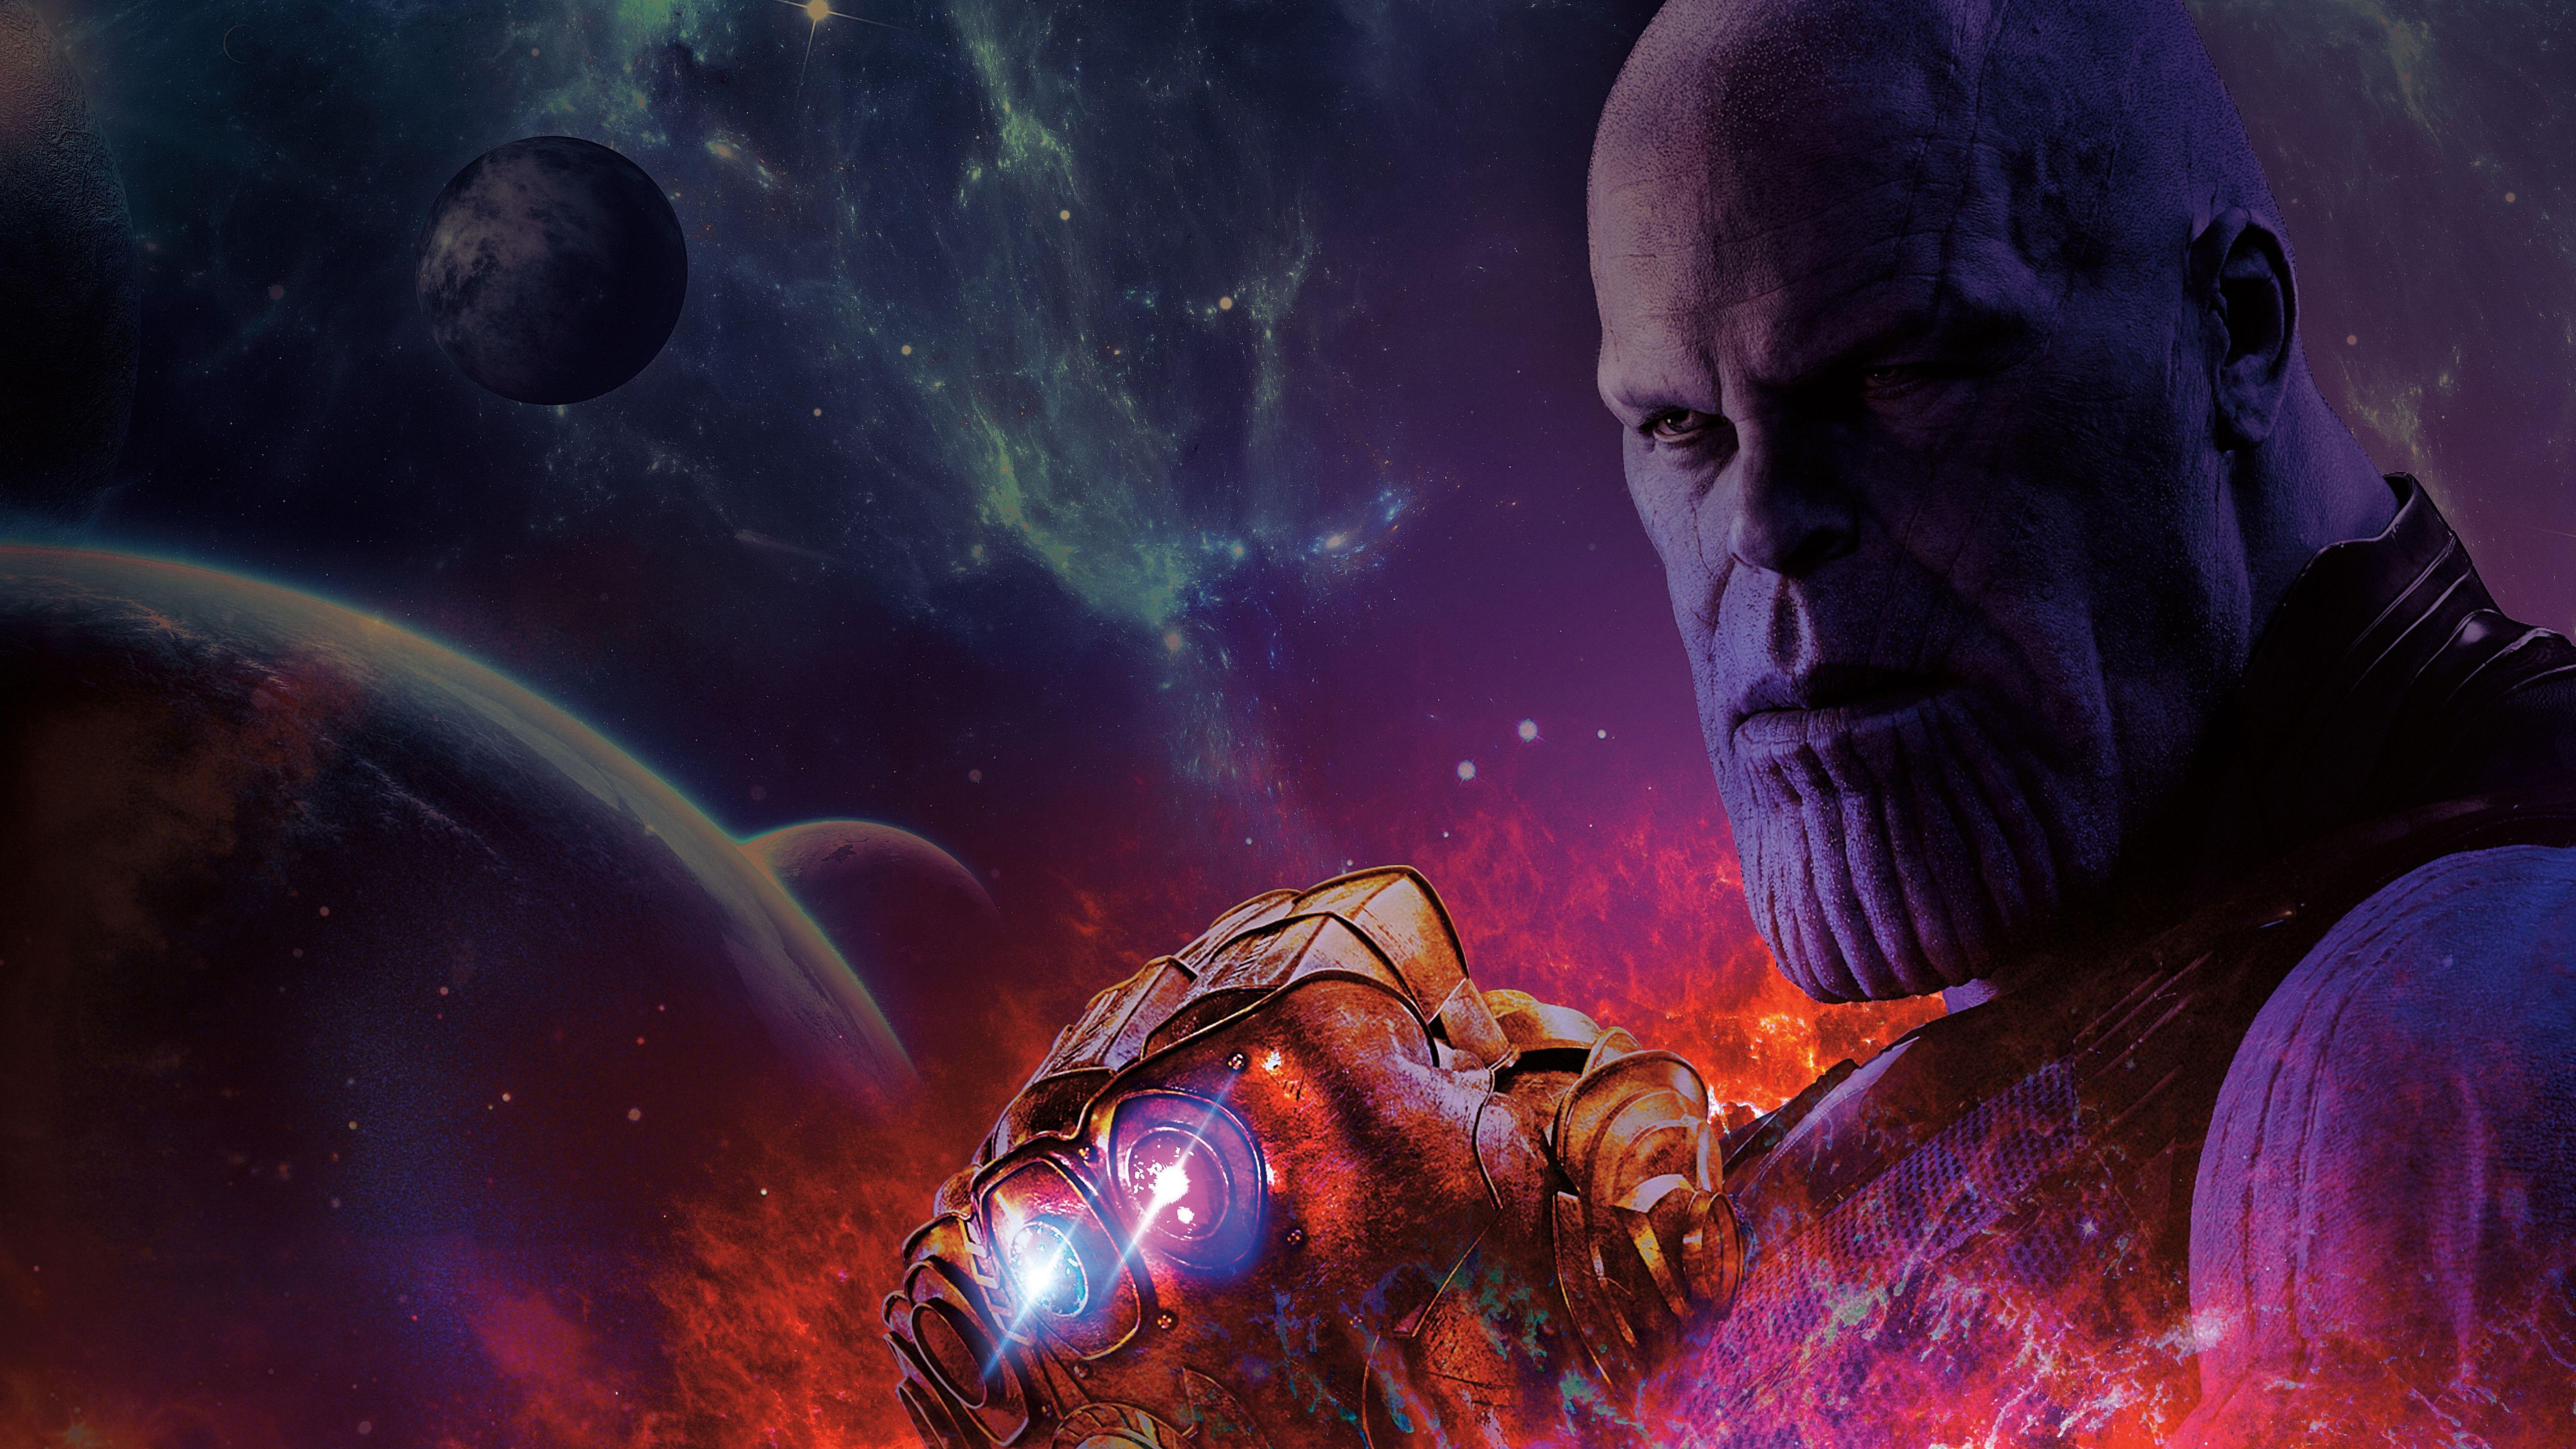 Thanos Infinity War Wallpapers Top Free Thanos Infinity War Backgrounds Wallpaperaccess